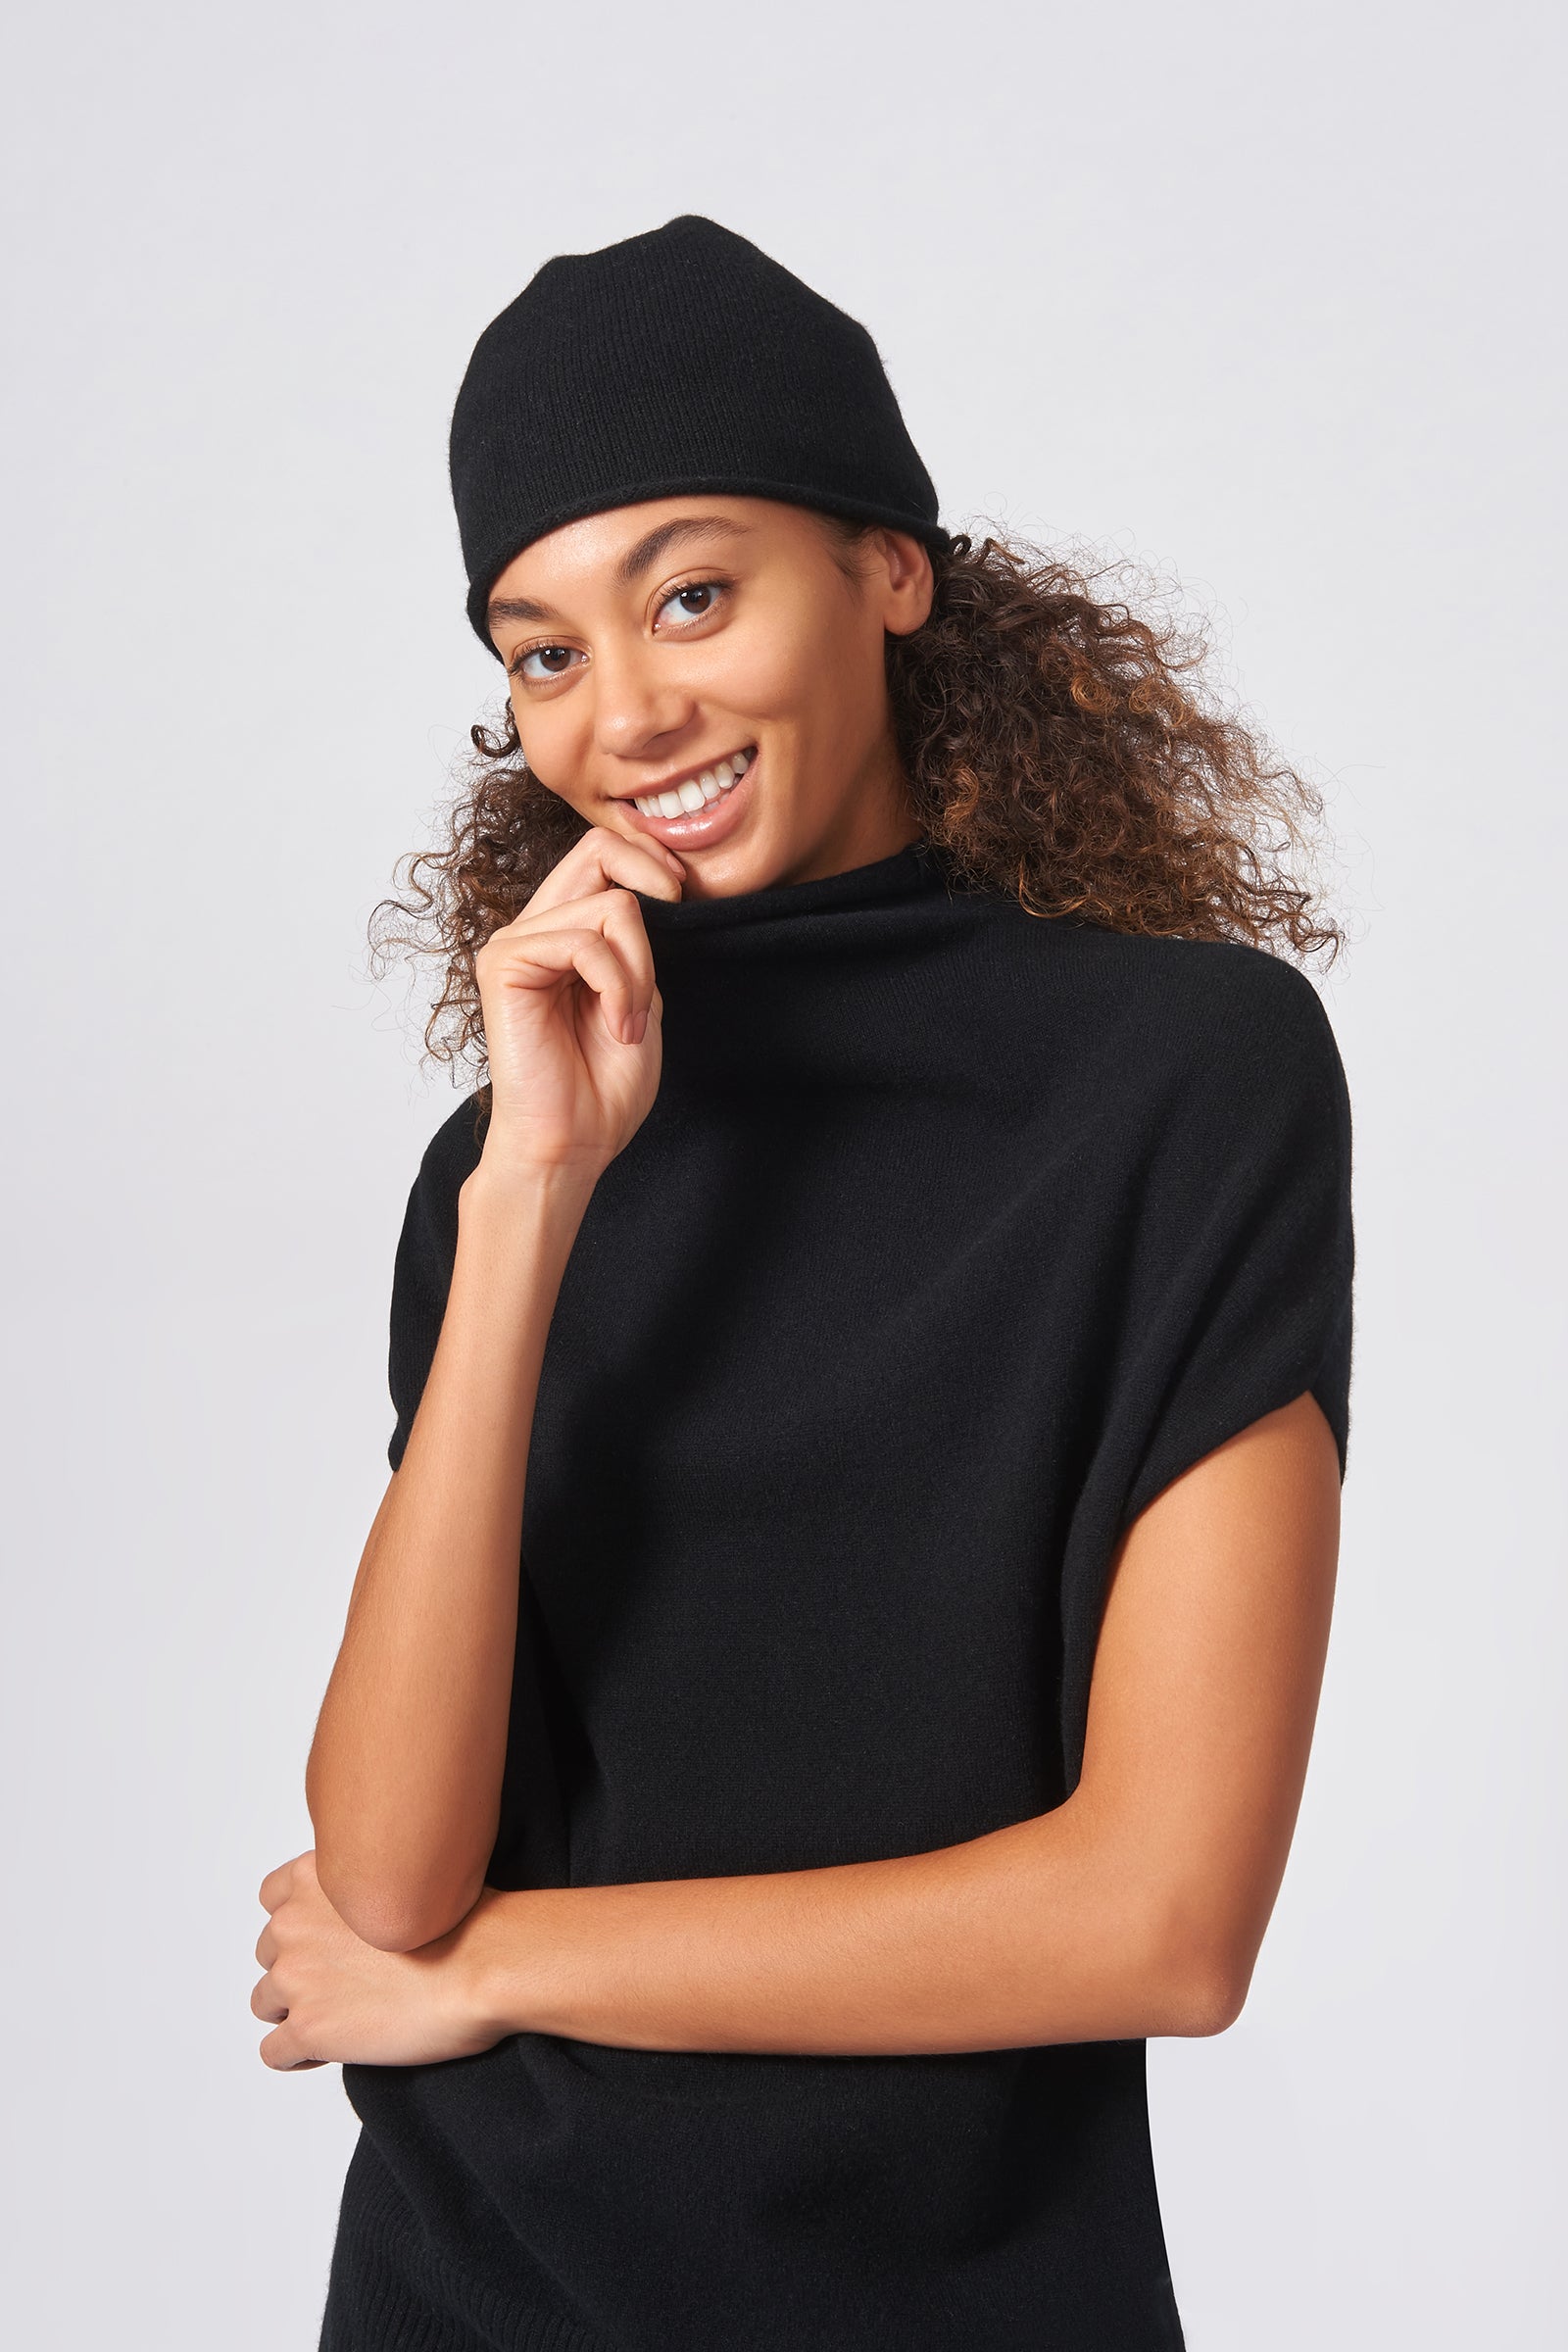 Cashmere Cap in Black Made From 100% Cashmere – KAL RIEMAN